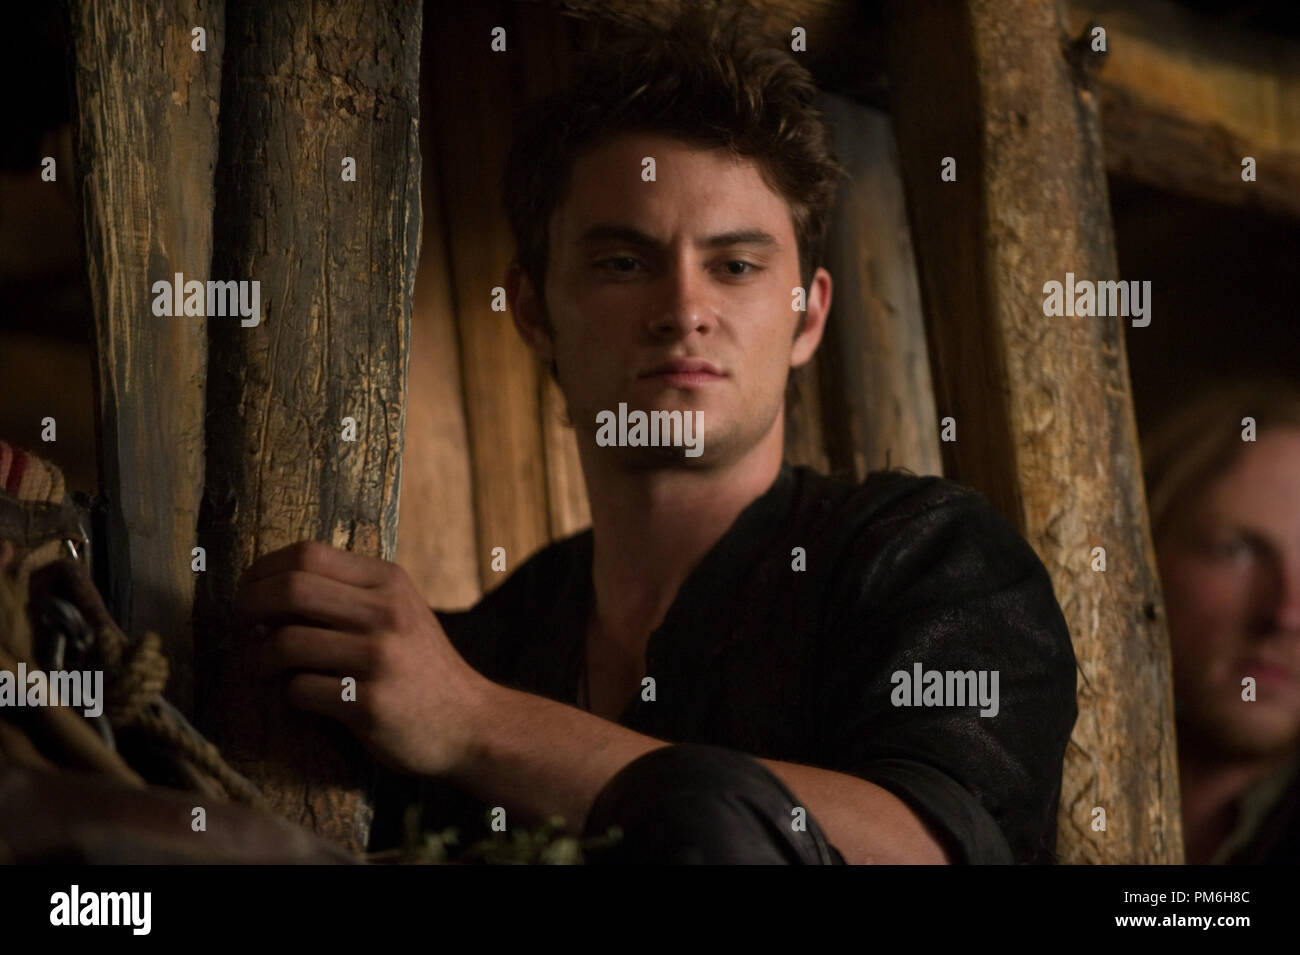 SHILOH FERNANDEZ as Peter in Warner Bros. Pictures' fantasy thriller "RED  RIDING HOOD," a Warner Bros. Pictures release Stock Photo - Alamy